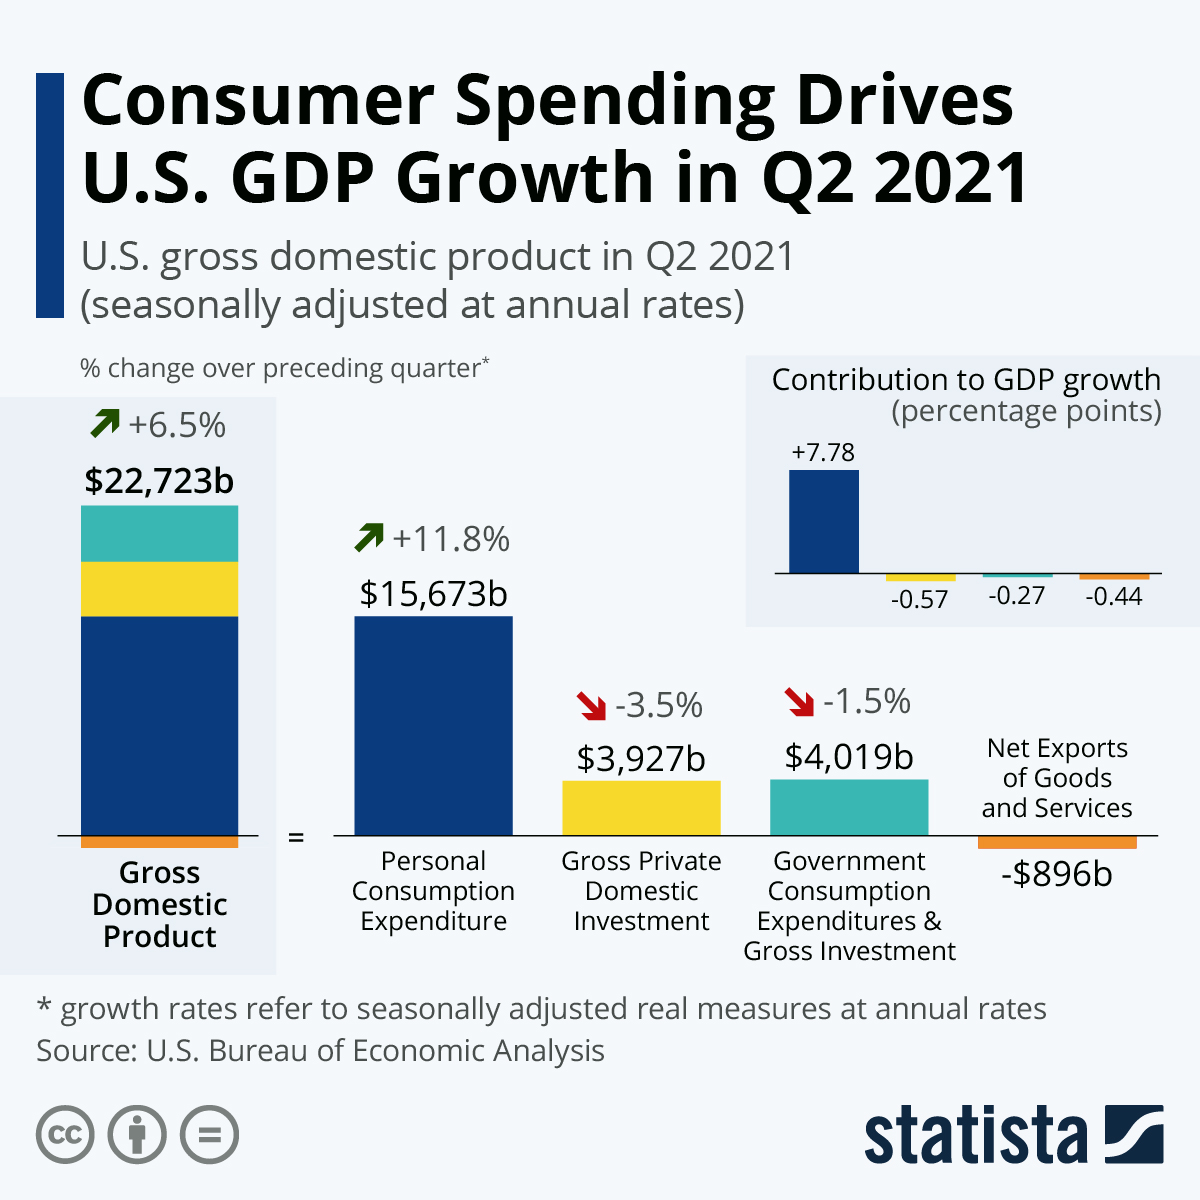 Consumer Spending Drives U.S. GDP Growth in Q2 2021